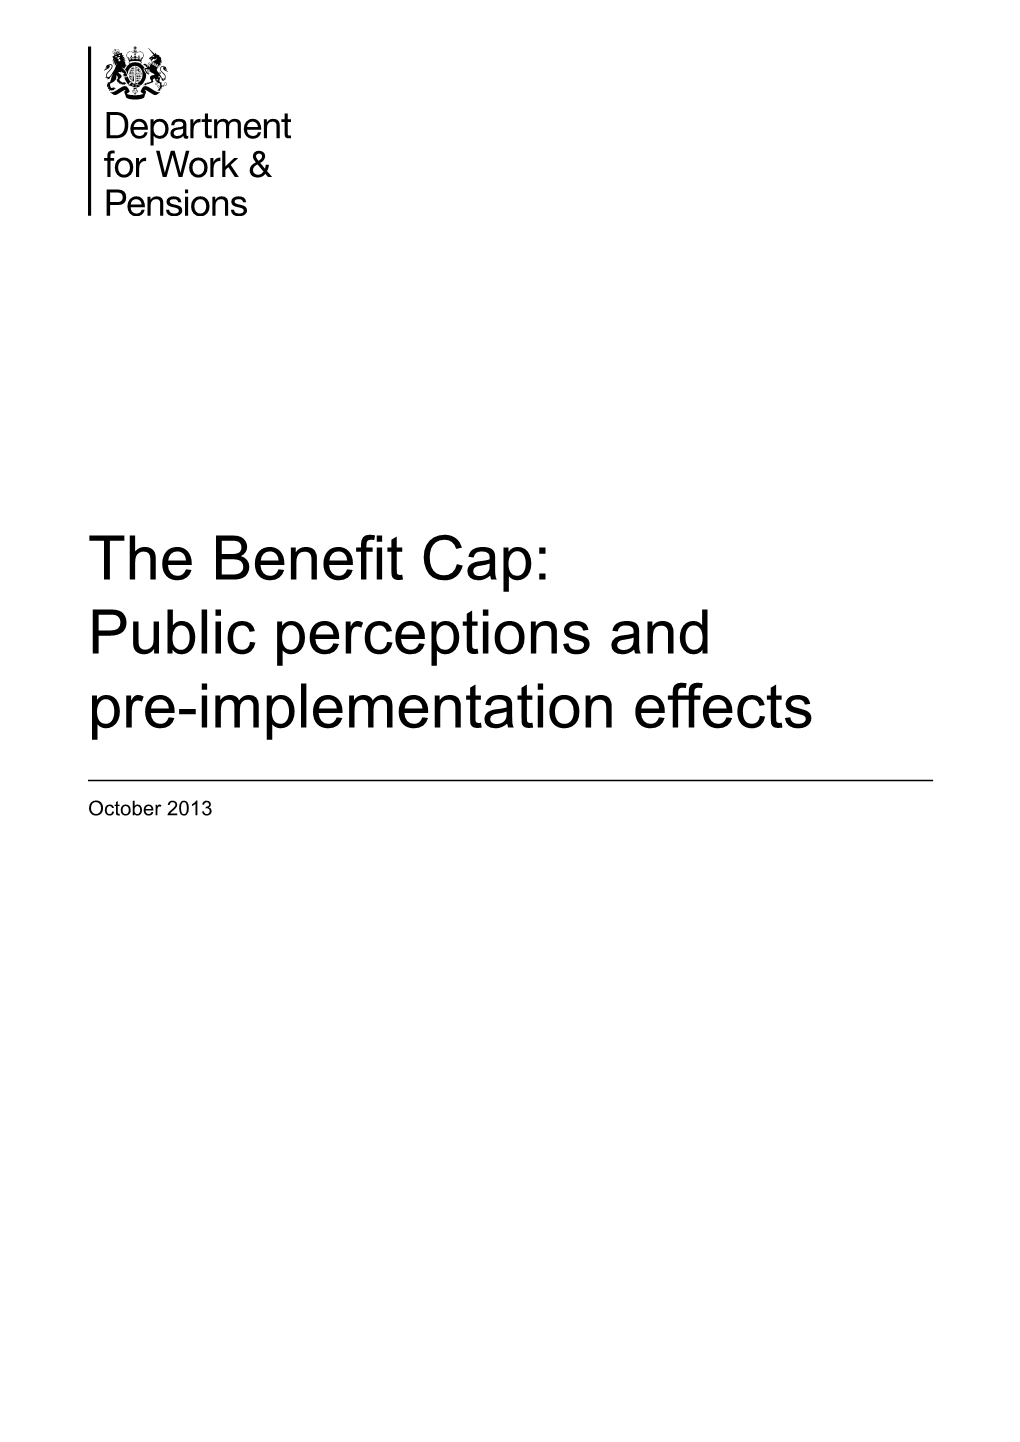 The Benefit Cap: Public Perceptions and Pre-Implementation Effects